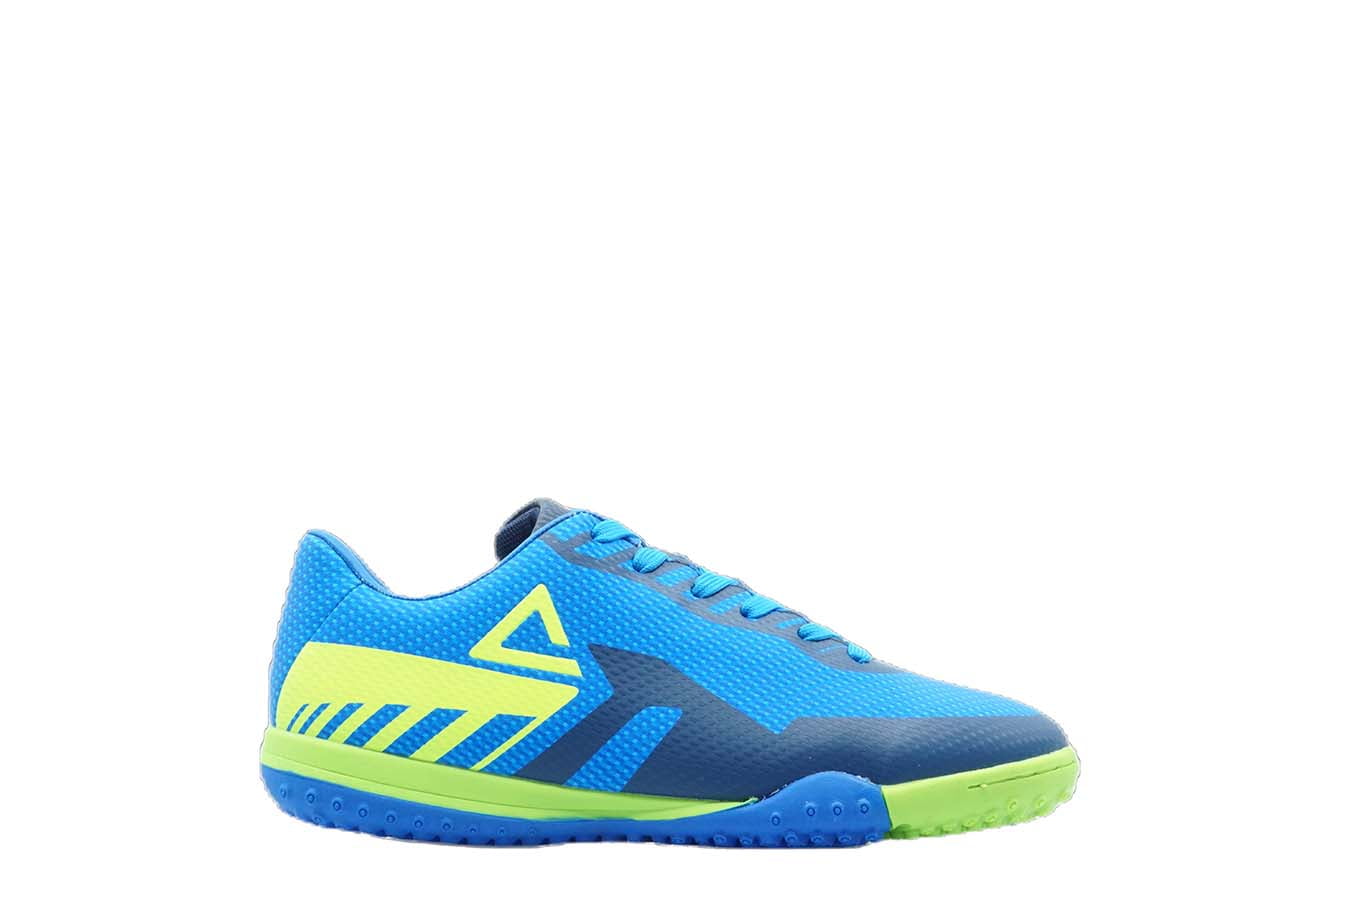 EW9260F] Kids Youth Peak TF Turf Blue Fluorescent Green Outdoor Soccer Shoes - 2.5 - (Youth) -